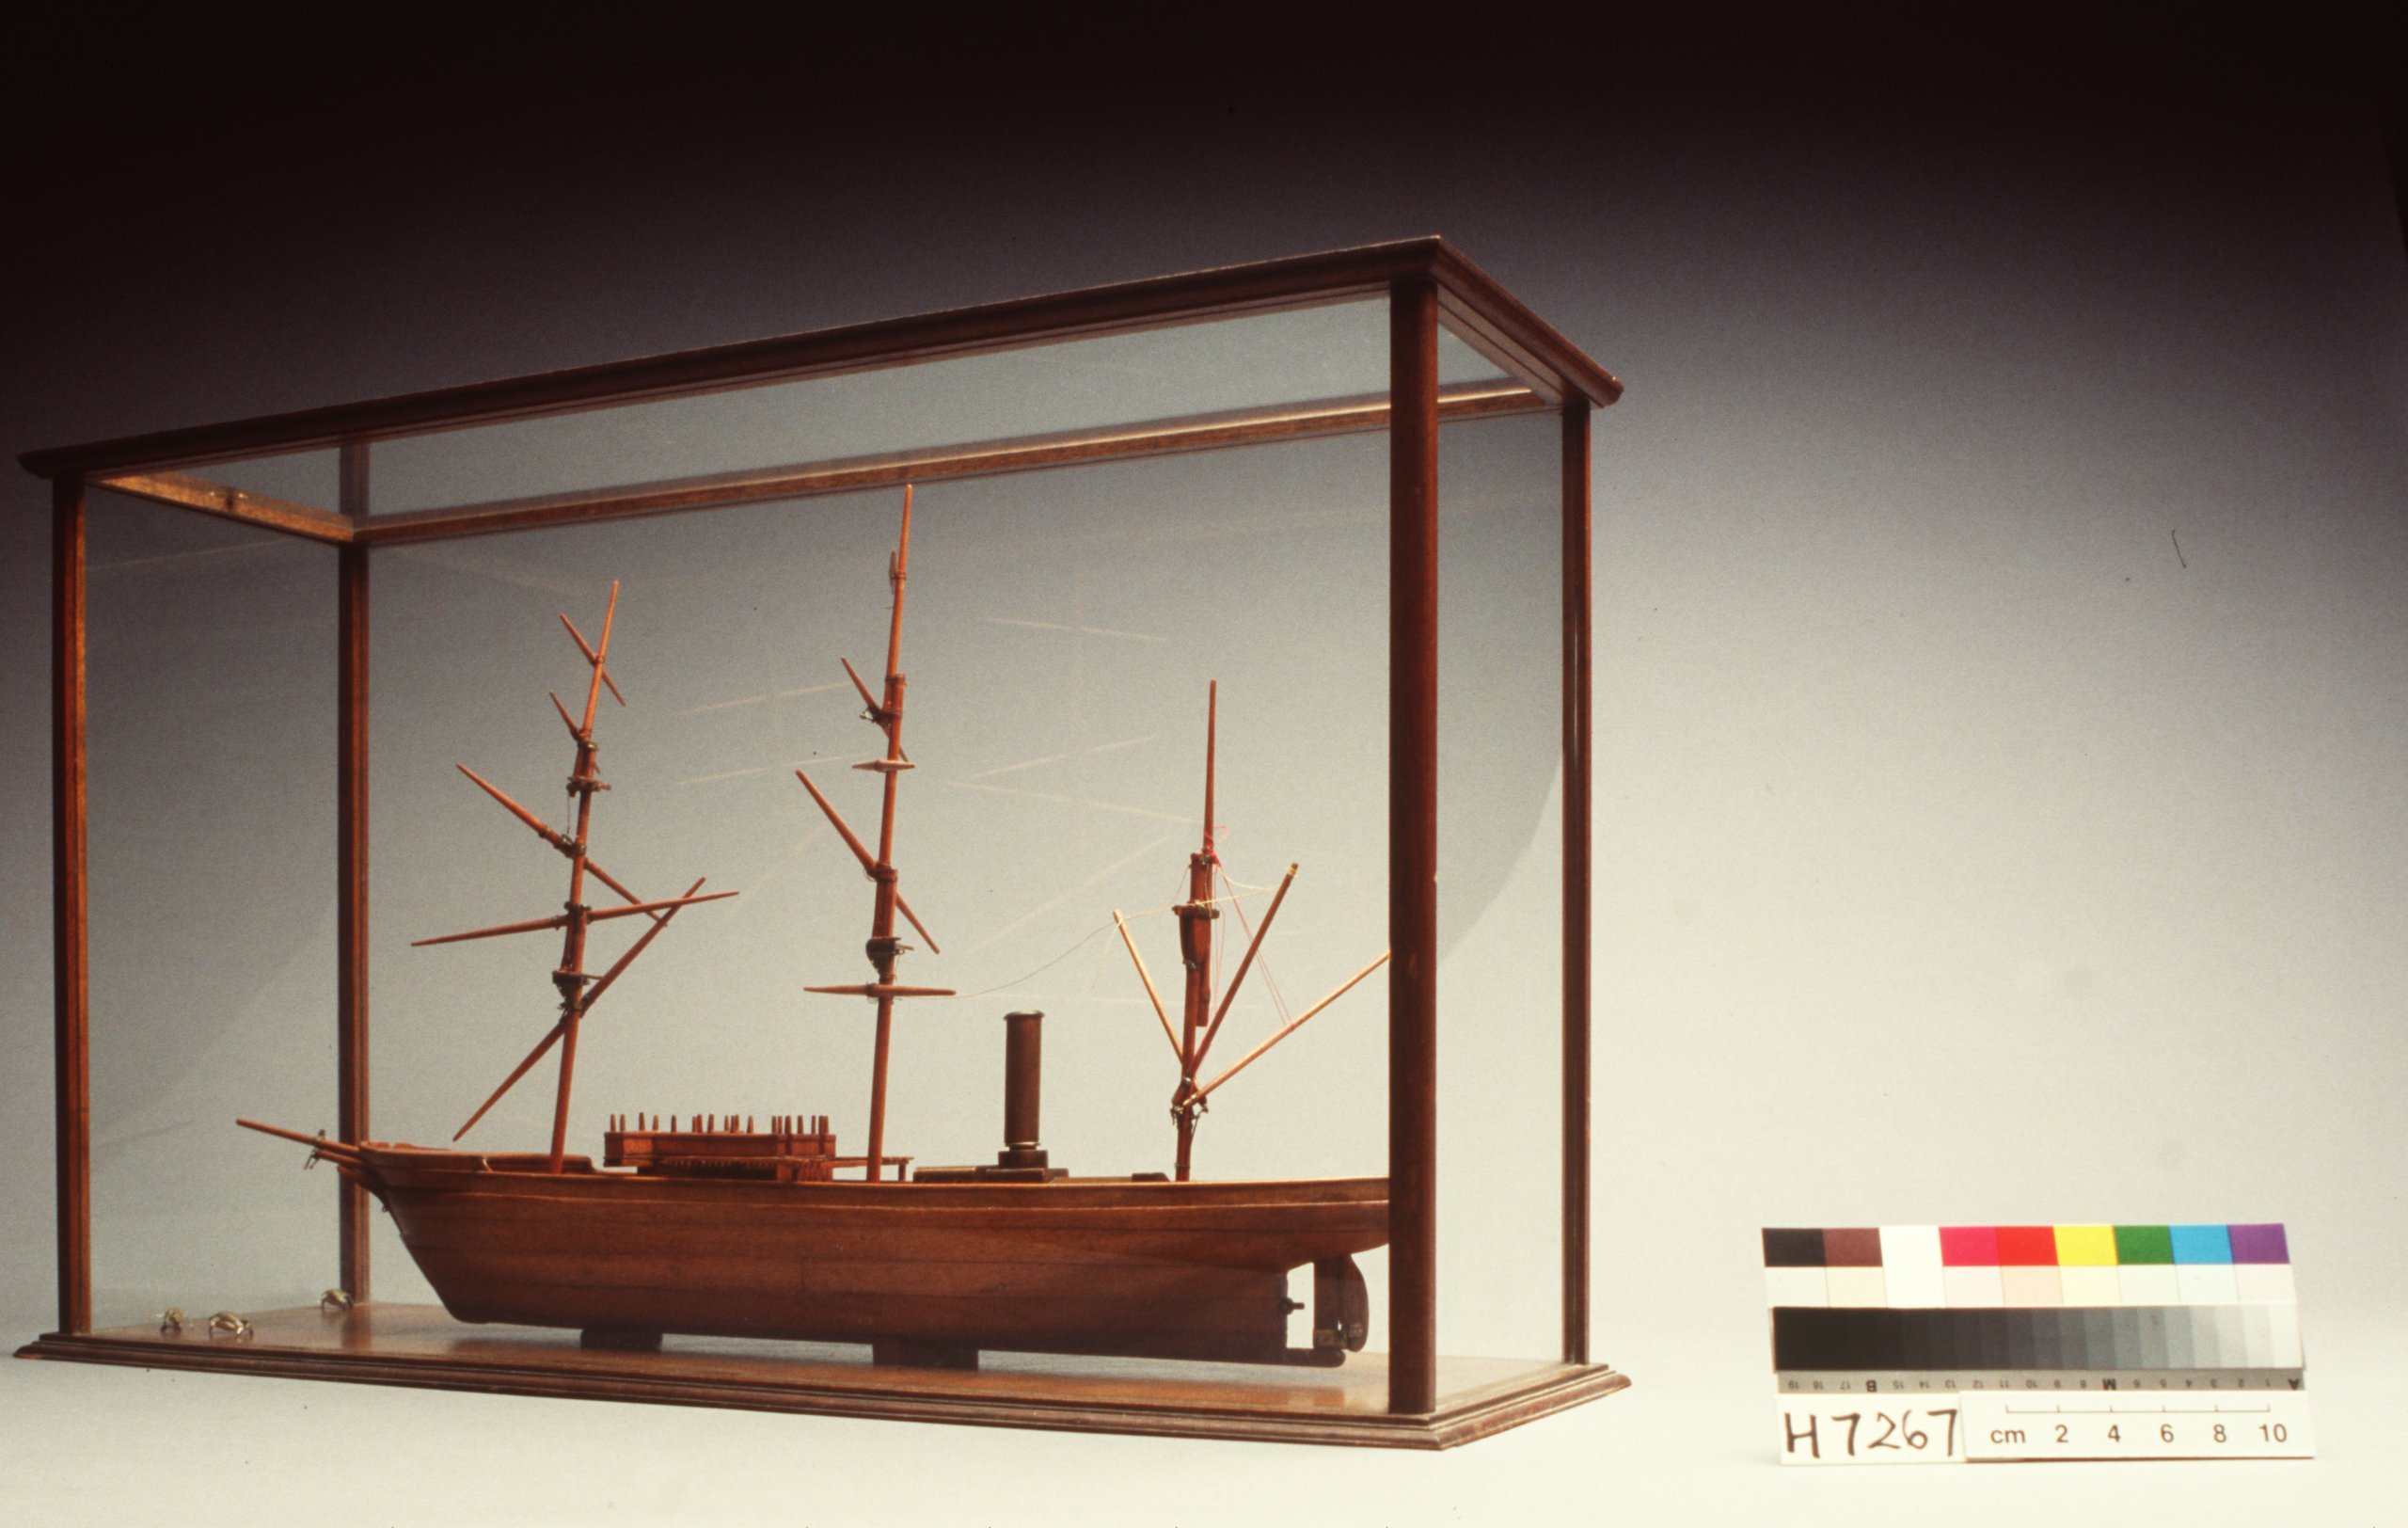 Ship model HMS Discovery made by Frank Hurley